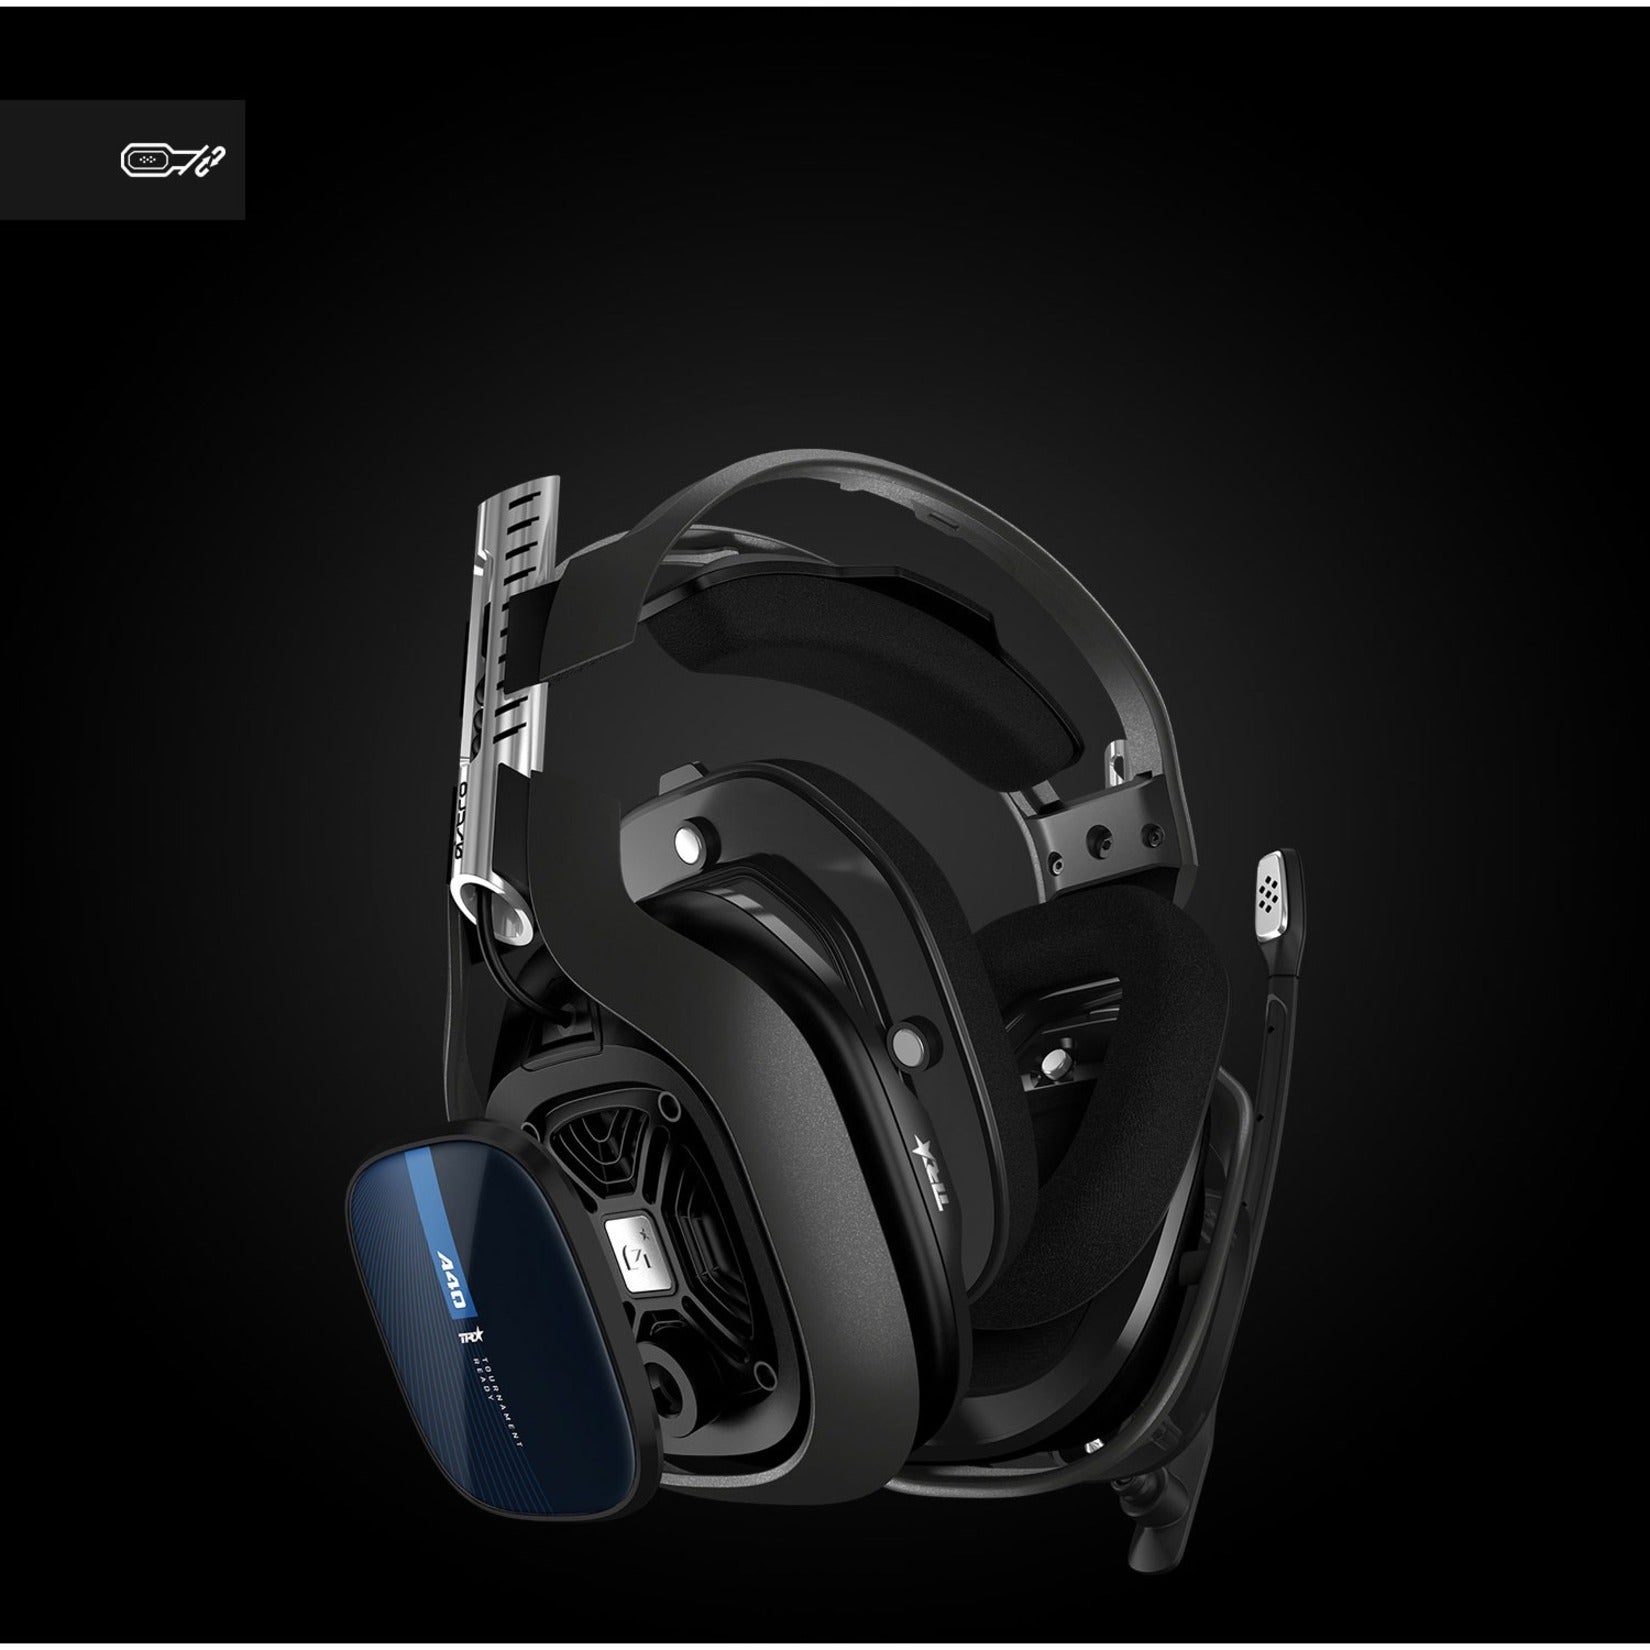 Astro 939-001663 A40 TR Headset for PS4 & PC, Lightweight Gaming Headset with Noise Isolation